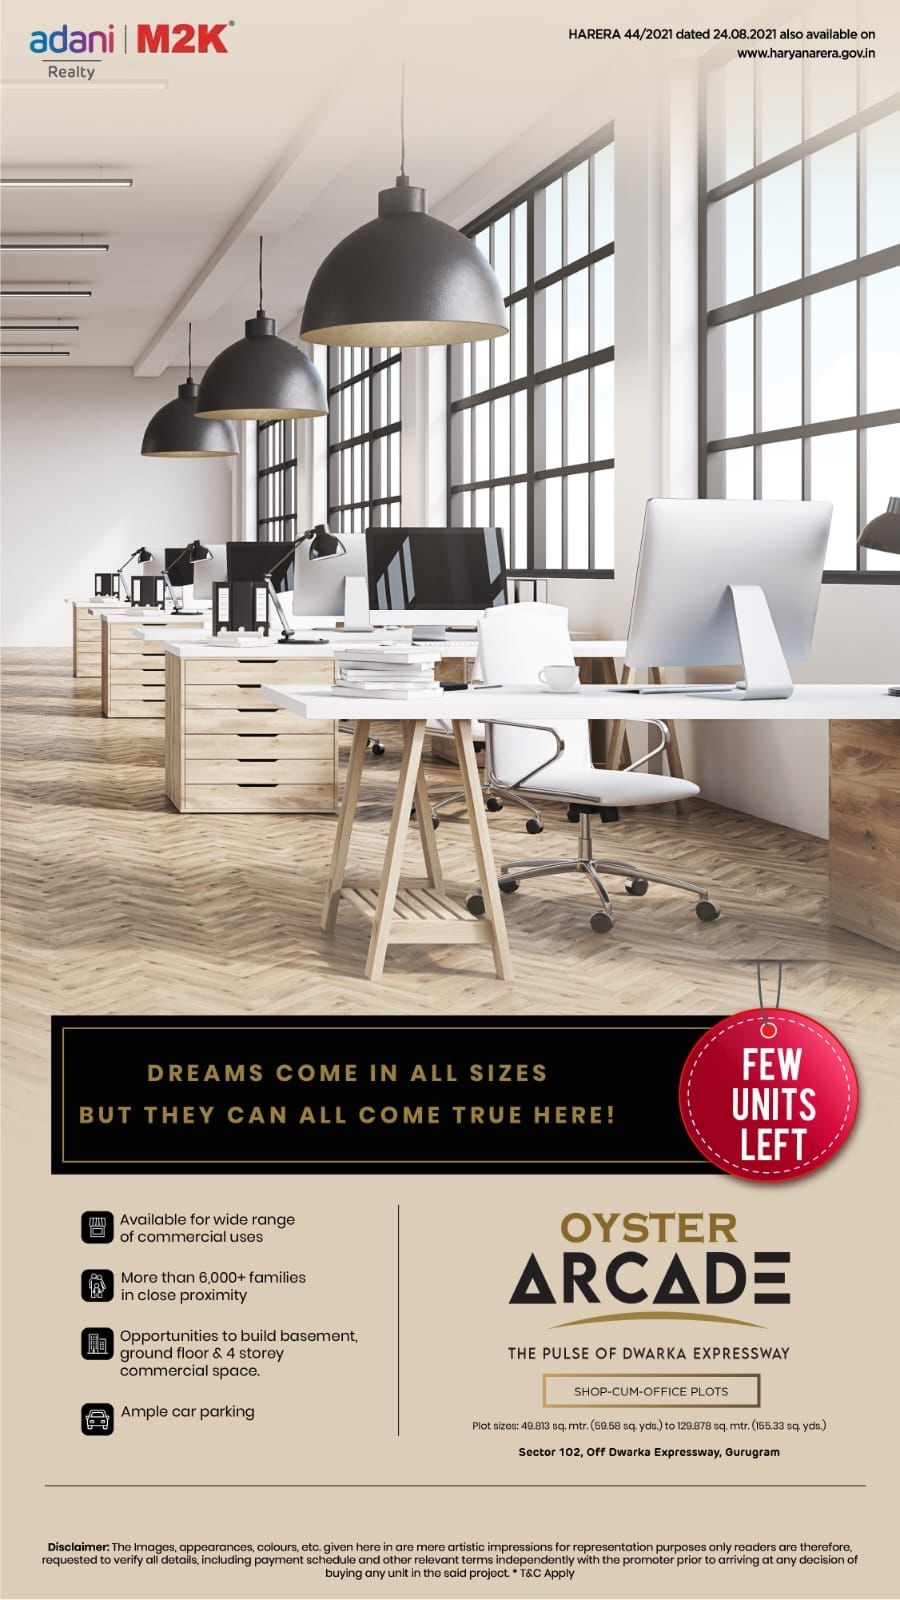 Few units left at Oyster Arcade in Sector 102, Gurgaon